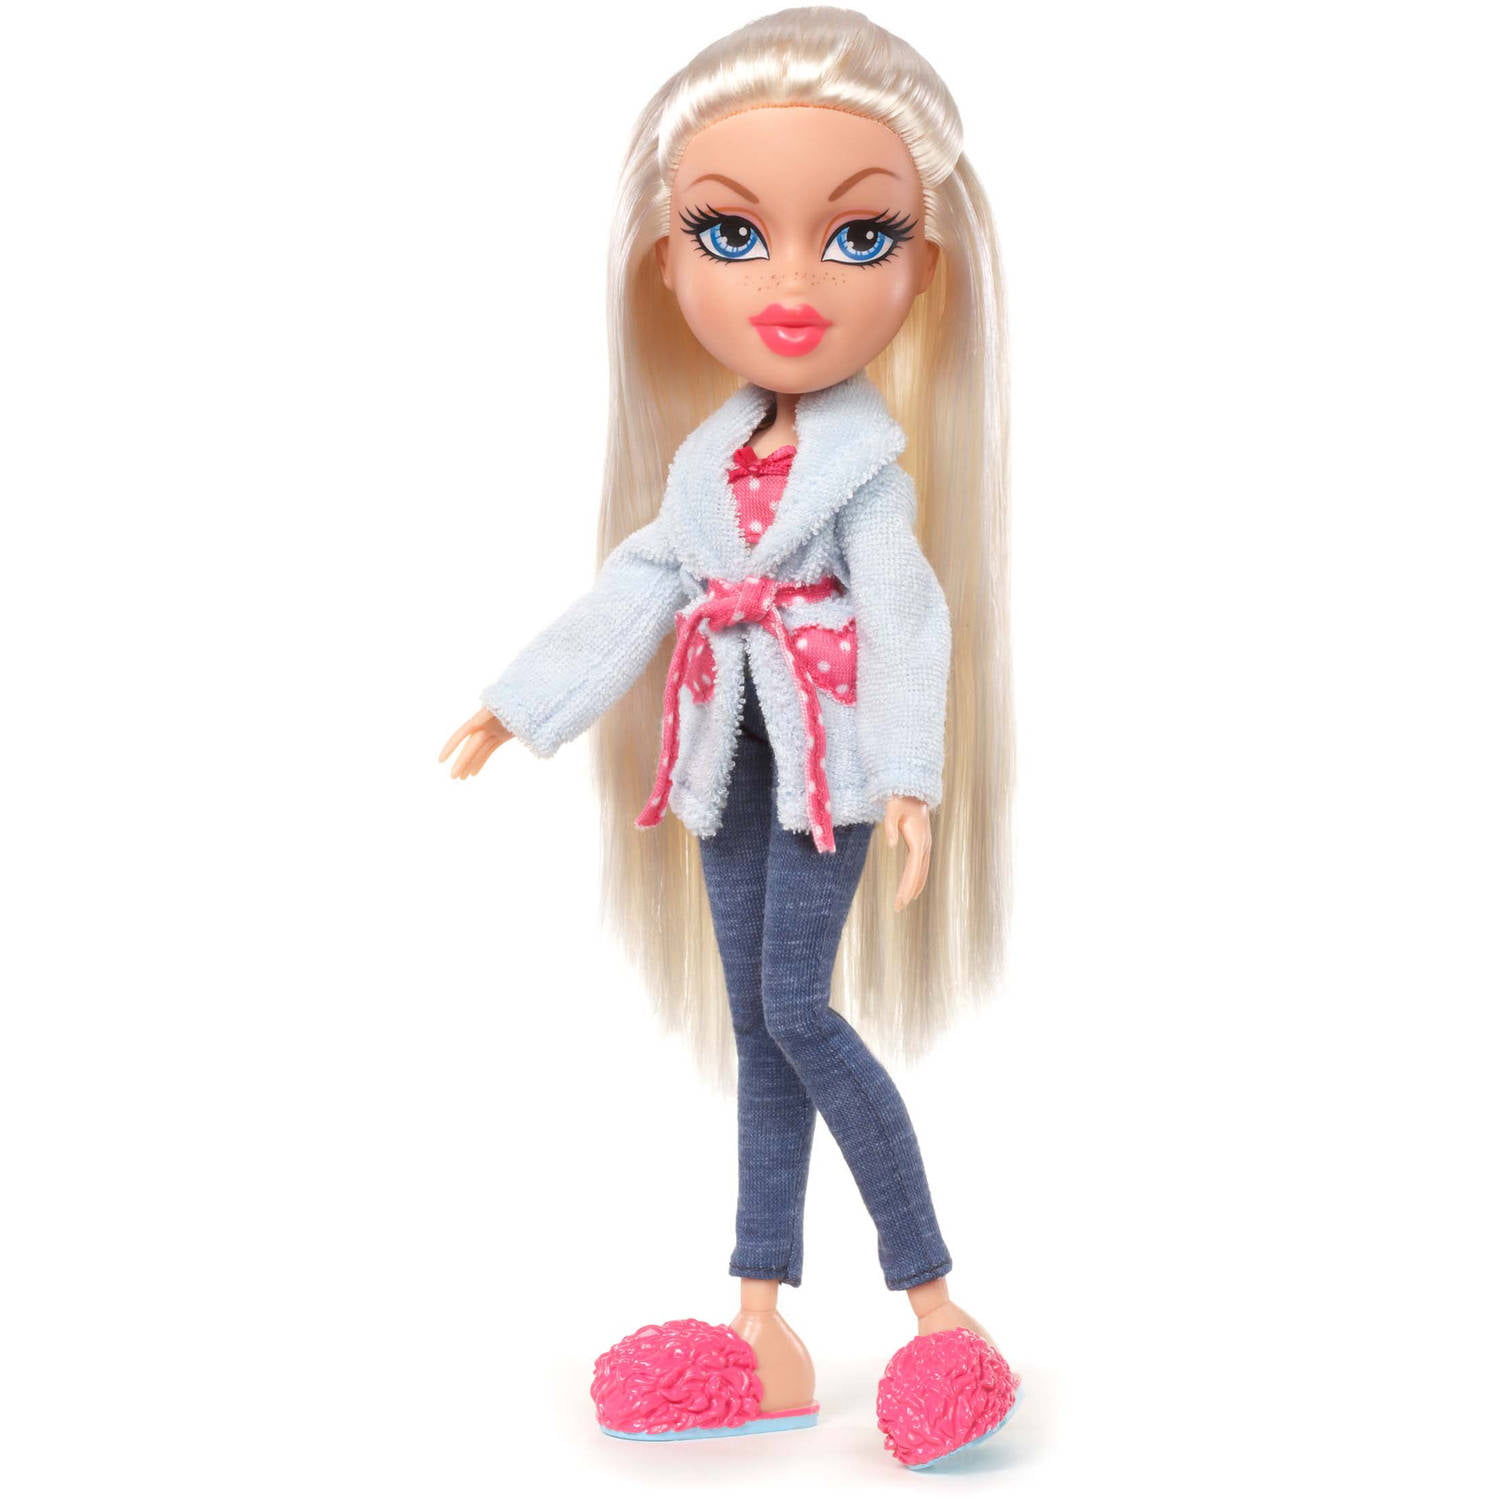 Bratz Sleepover Party Doll, Cloe, Great Gift for Children Ages 5